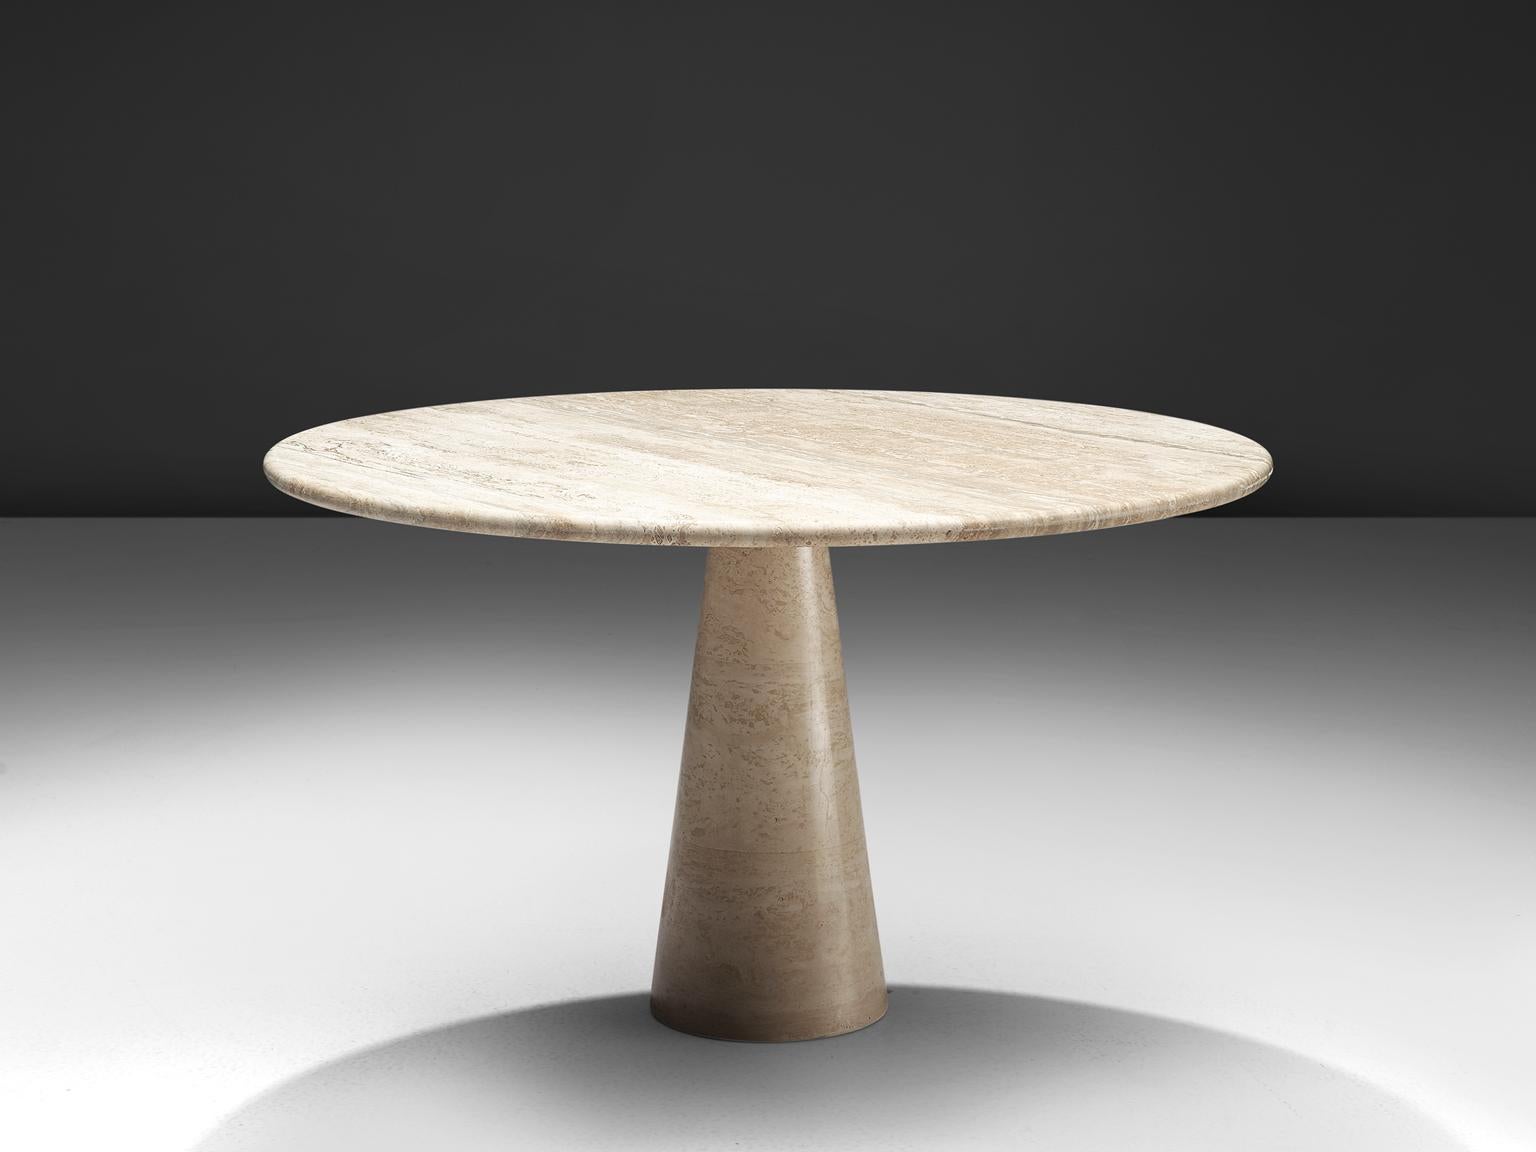 Centre table, travertine, Europe, 1970s.

This strong dining table features a colon, cone shaped foot and a thick circular travertine tabletop. The aesthetics are archetypical for postmodern design, bearing references to architectural forms and